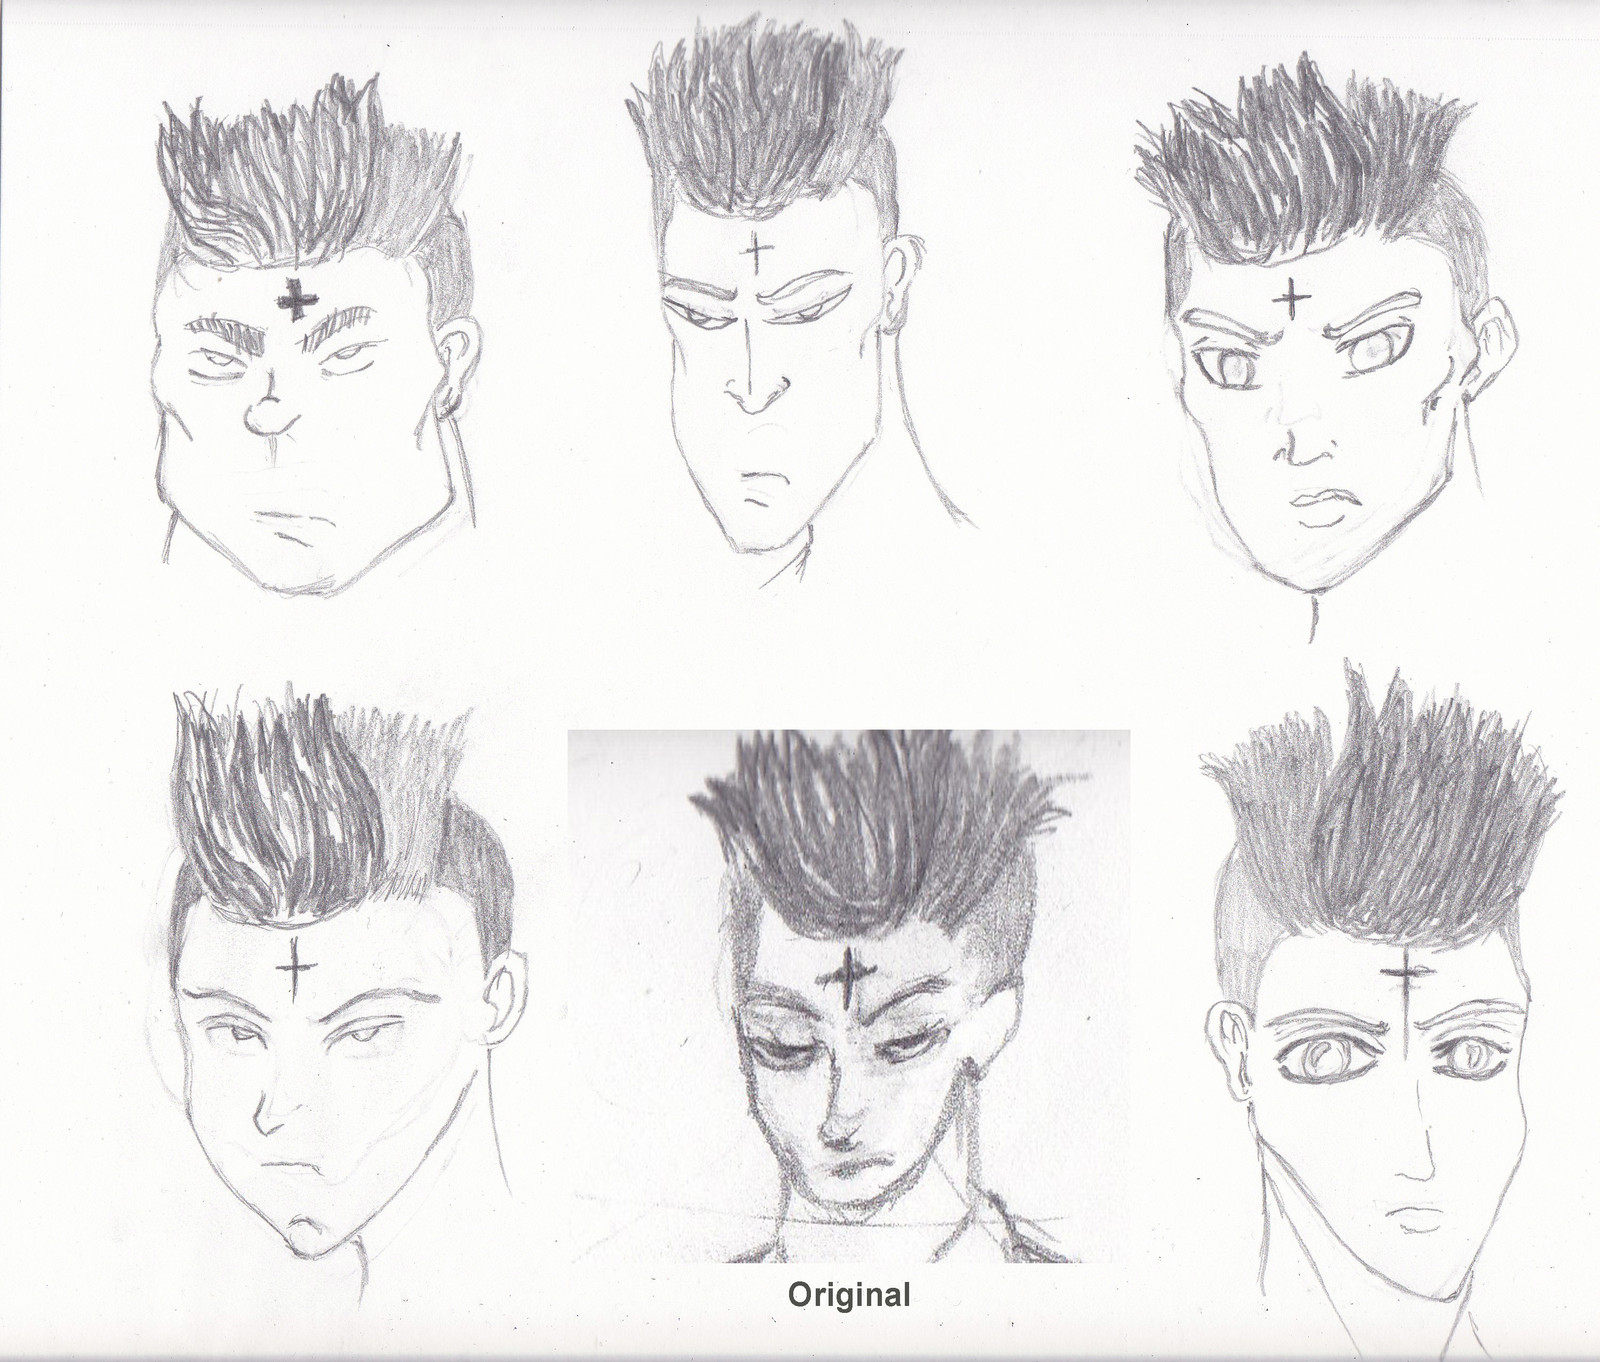 Different Facial Characterizations